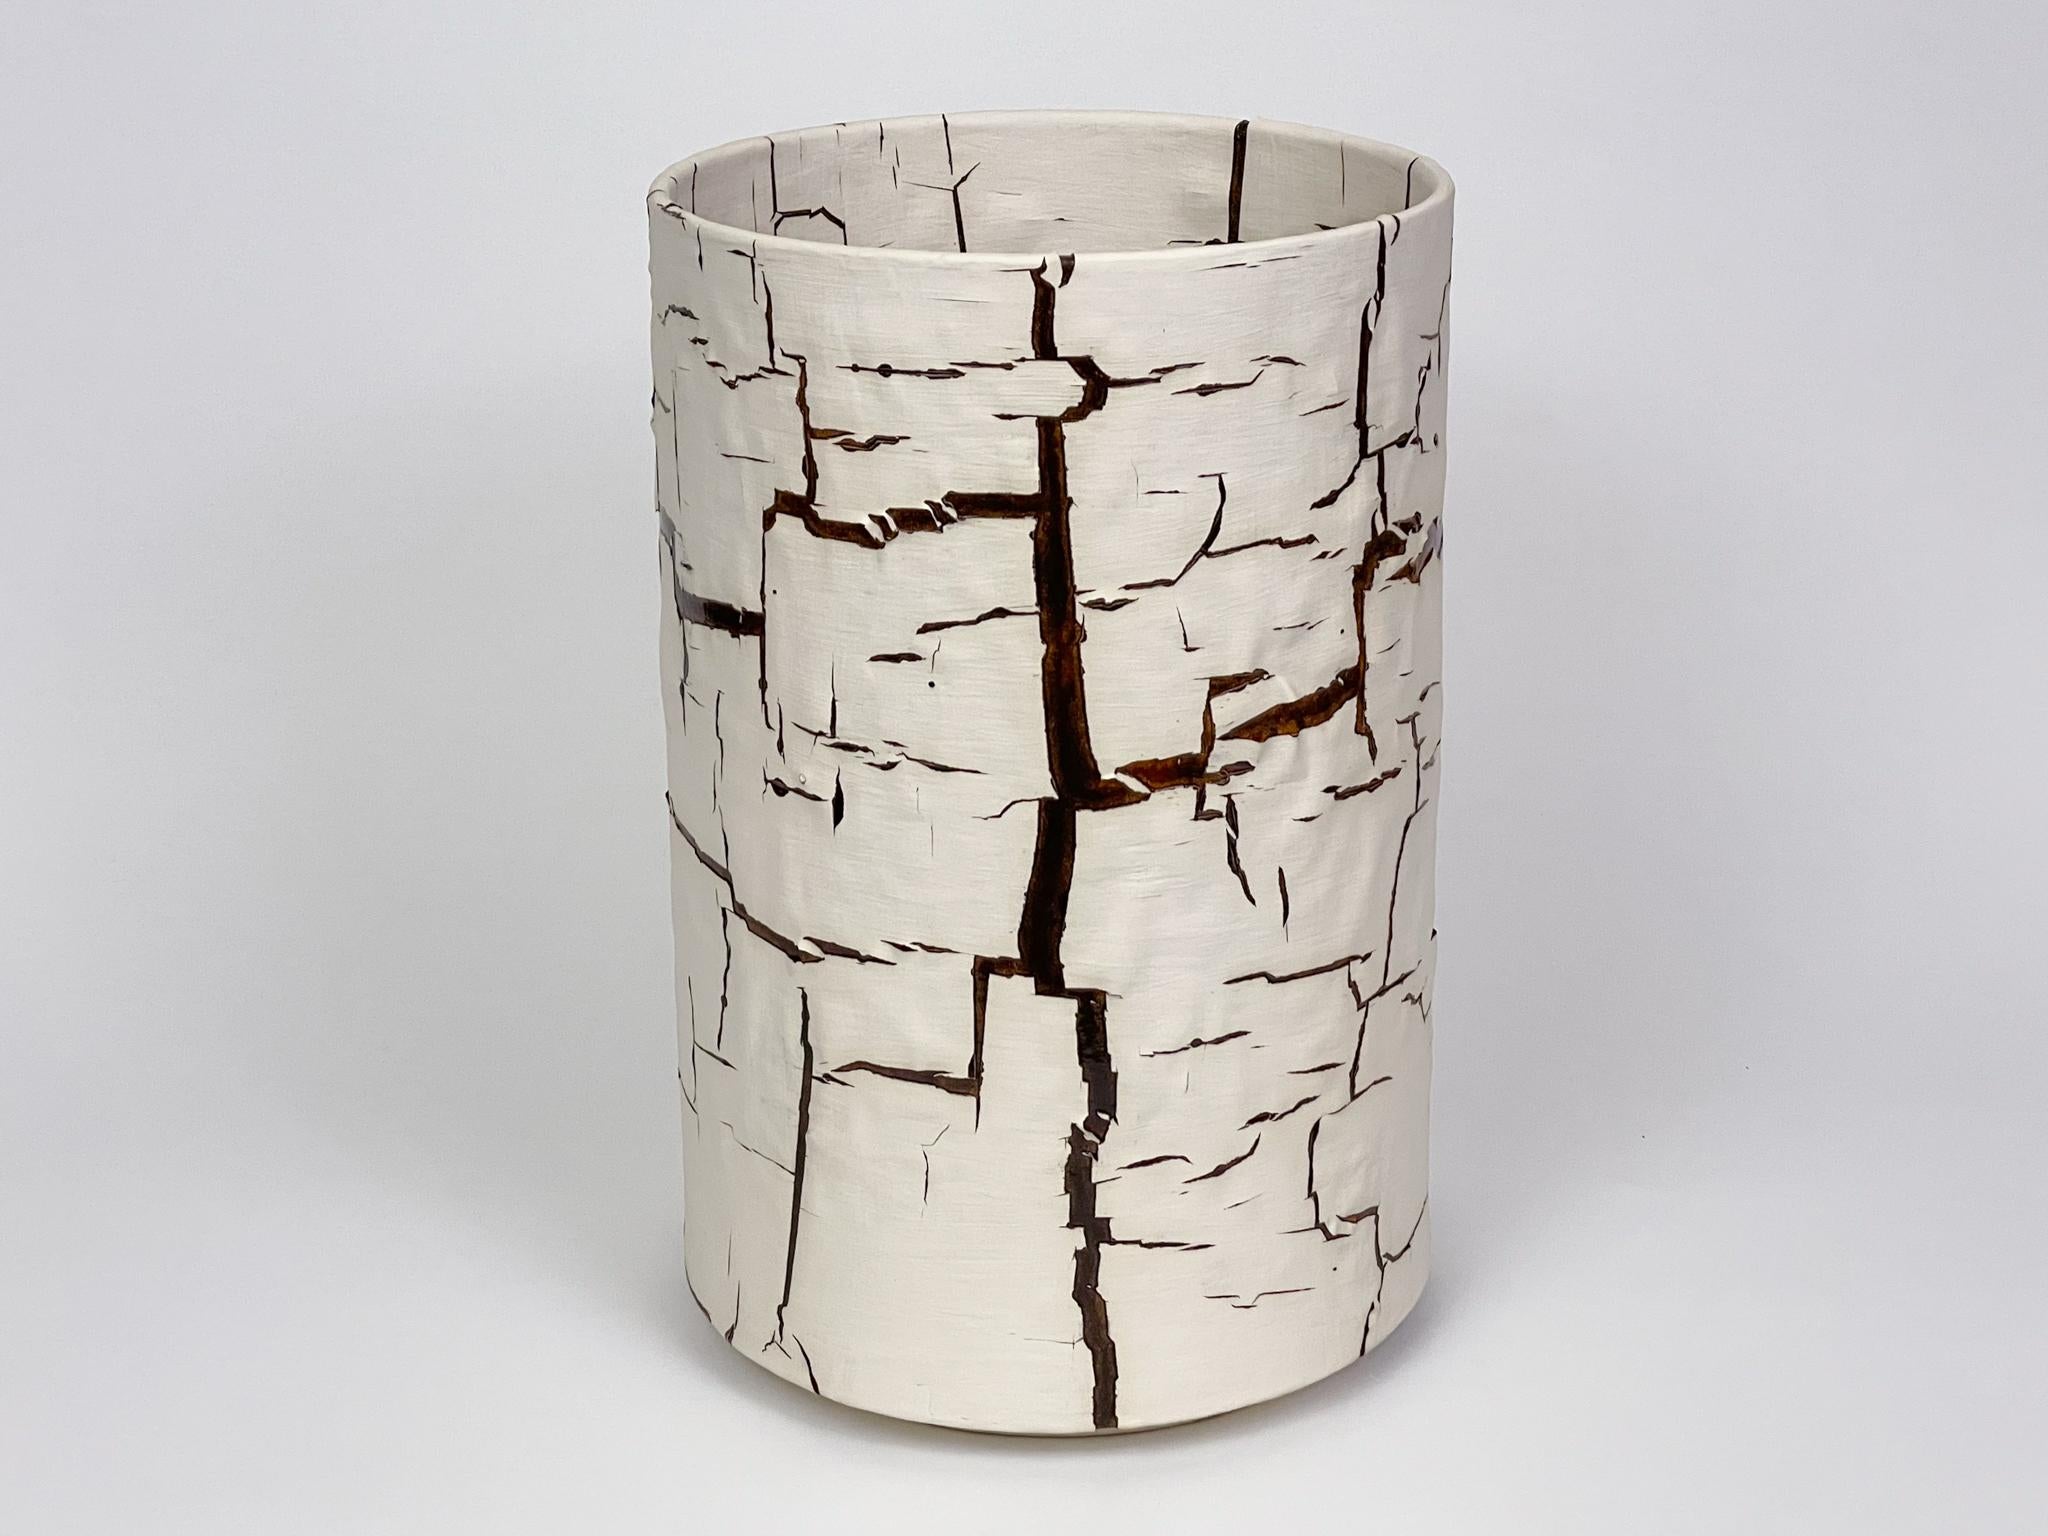 Glazed ceramic cylindrical sculpture by William Edwards
Hand built earthenware decorative vessel, fired multiple times to achieve a textured surface of random abstraction, White matte with dark amber gloss glaze breaking through.

William received